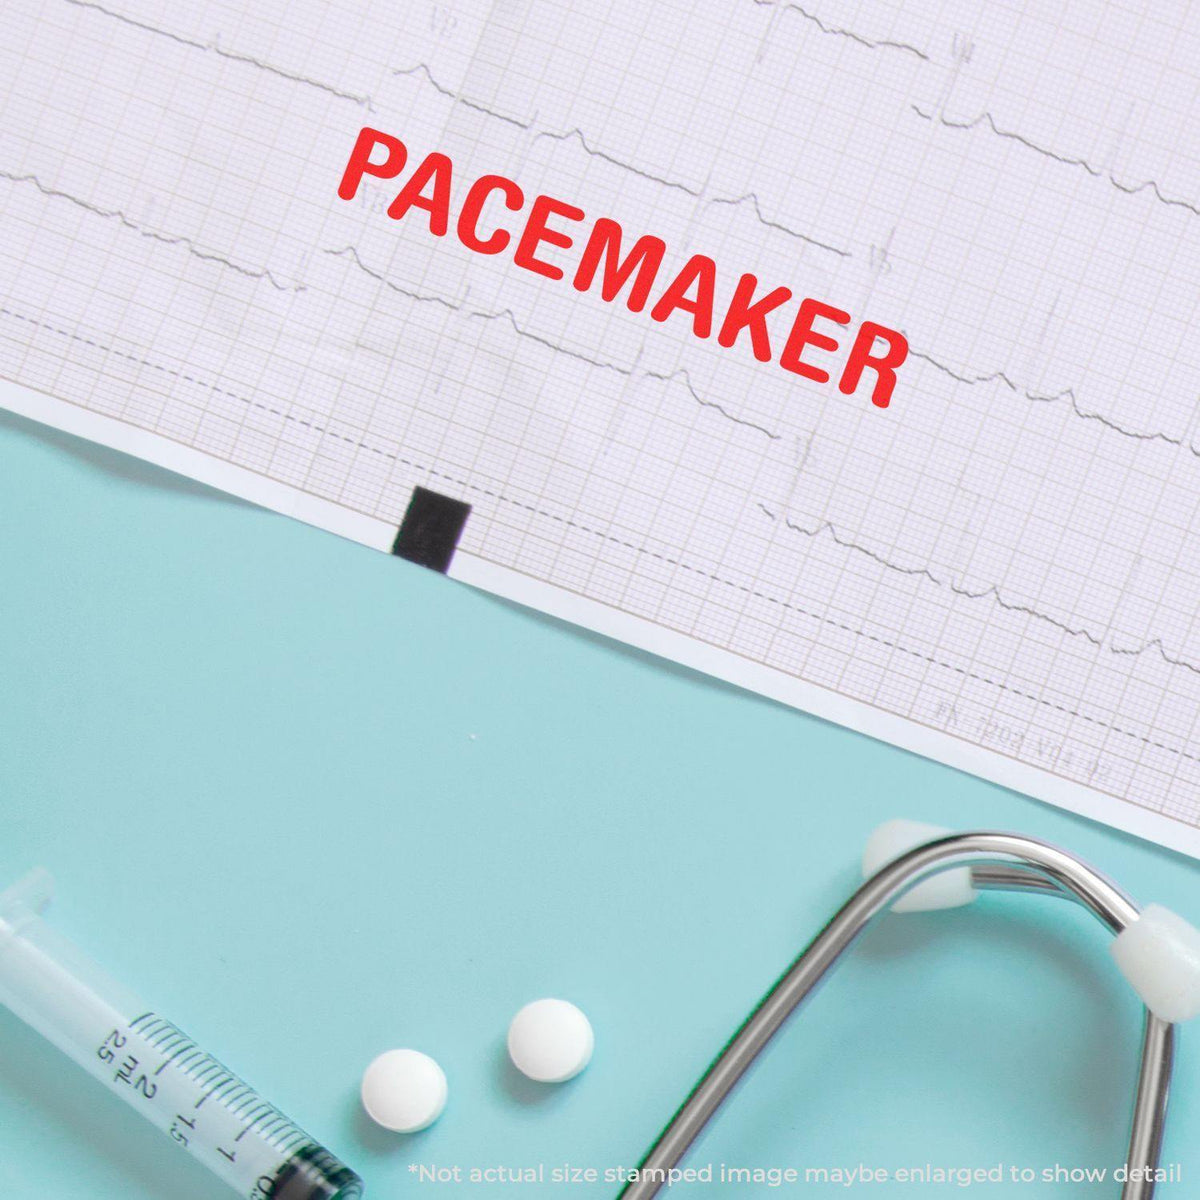 In Use Slim Pre Inked Pacemaker Stamp Image